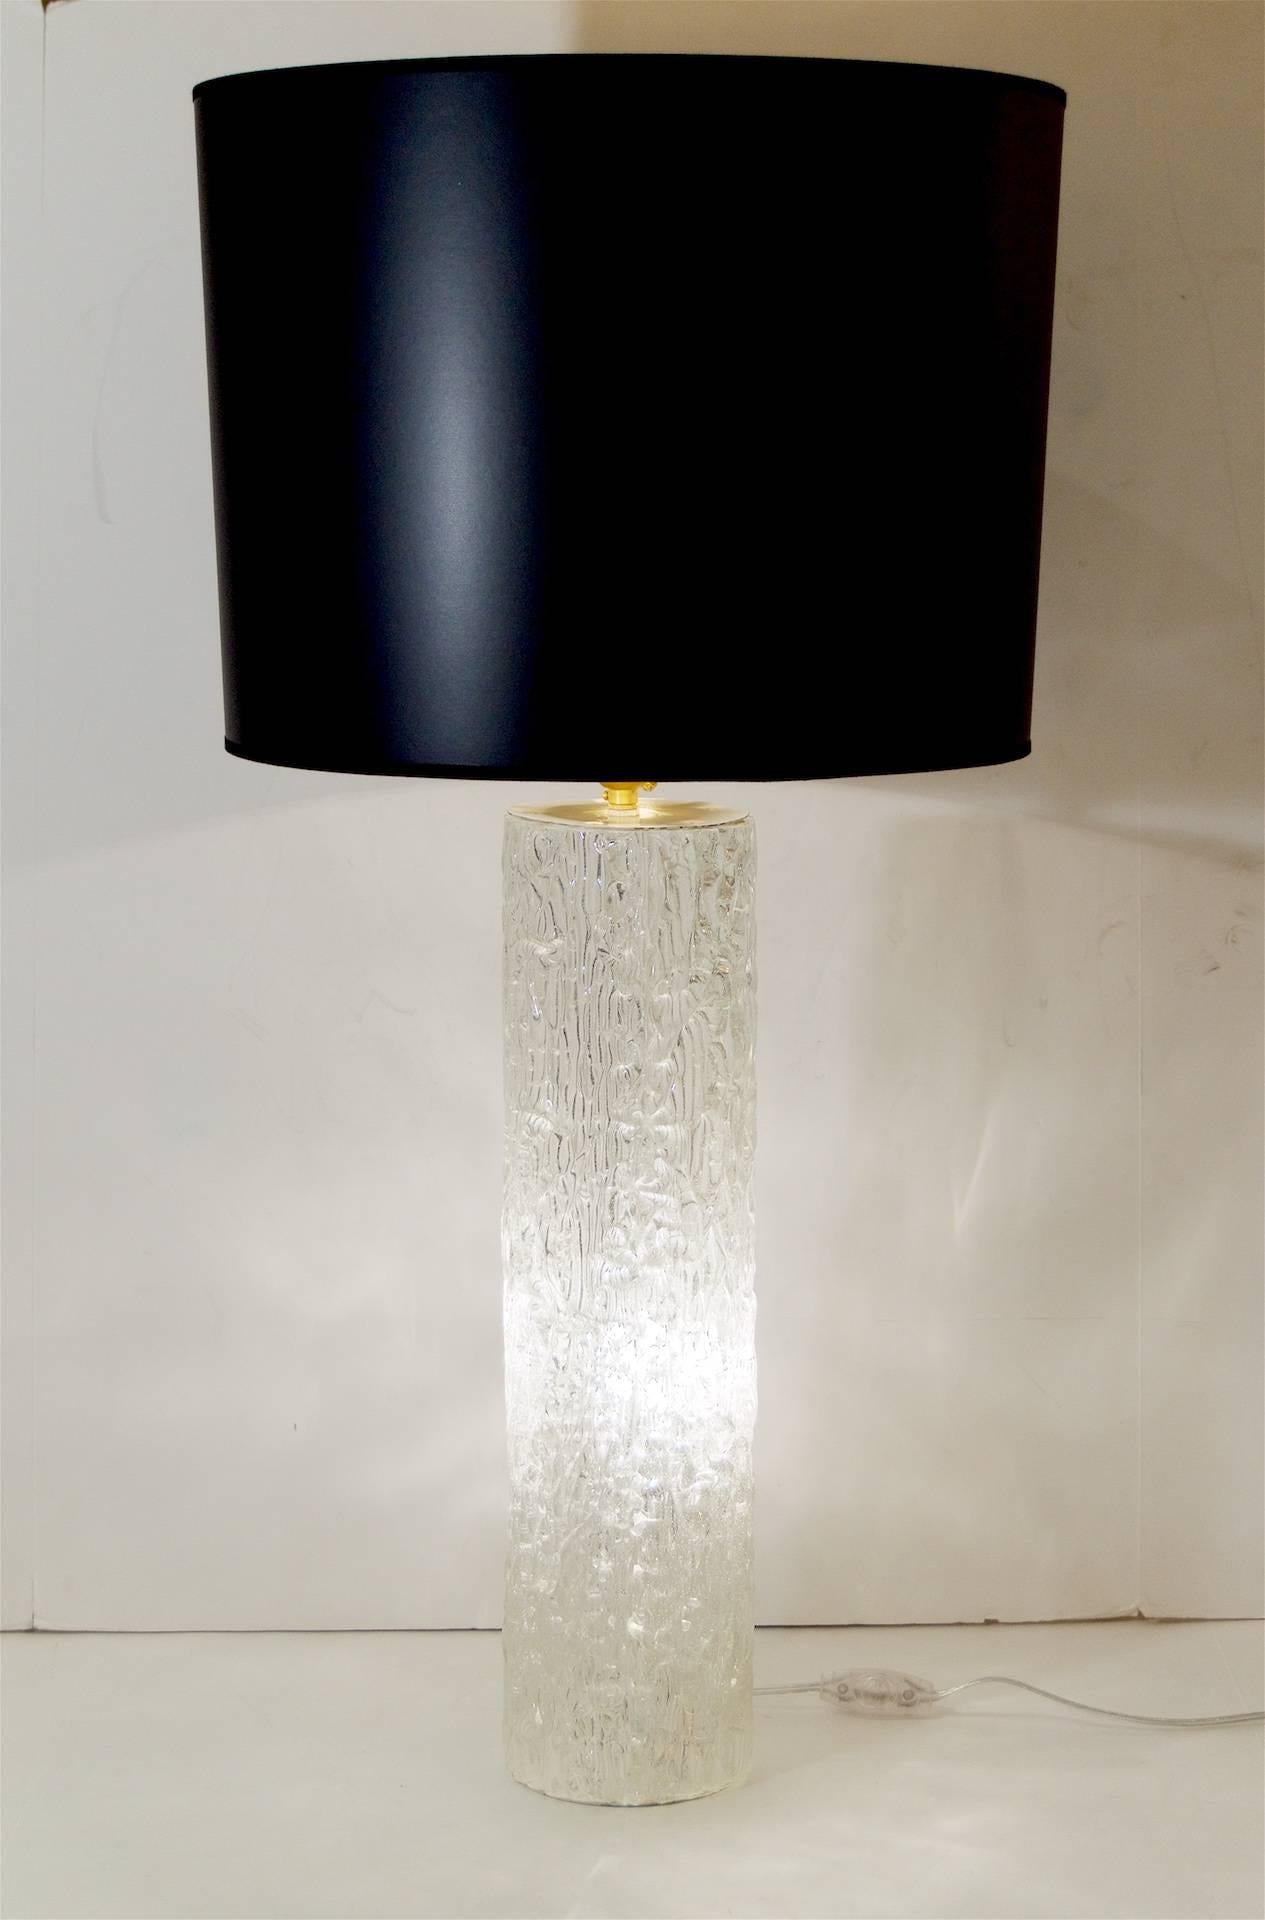 A beautiful cylindrical lamp attributed to Kaiser Leuchten with interior lighting, the exterior having a mottled organic ice glass surface with a refracting interior pattern.

Interior socket takes one E-14 base bulb up to 40 watts. Top socket